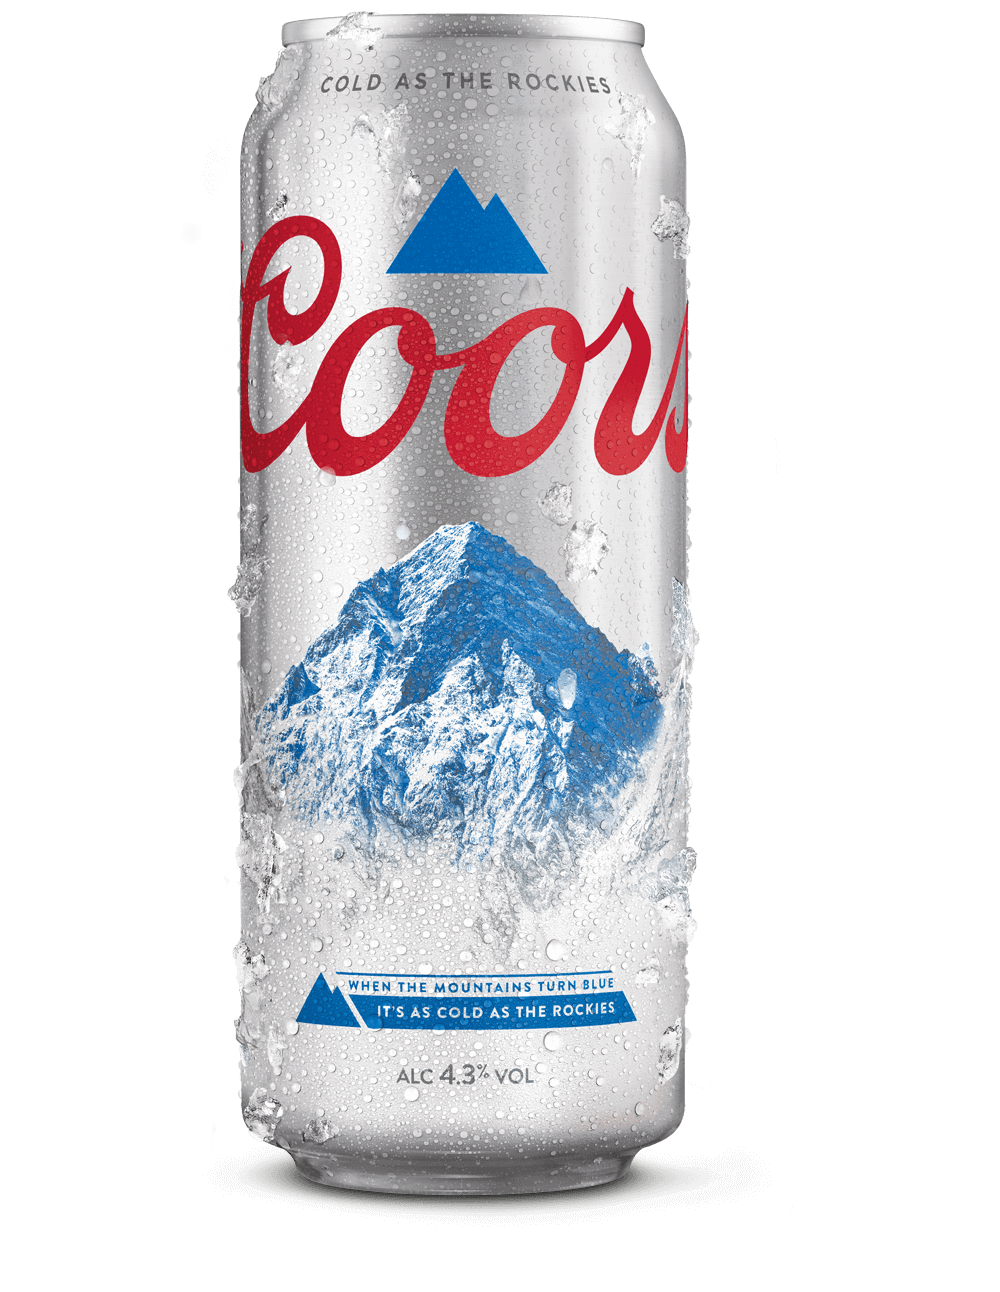 Coors 500ml can iced